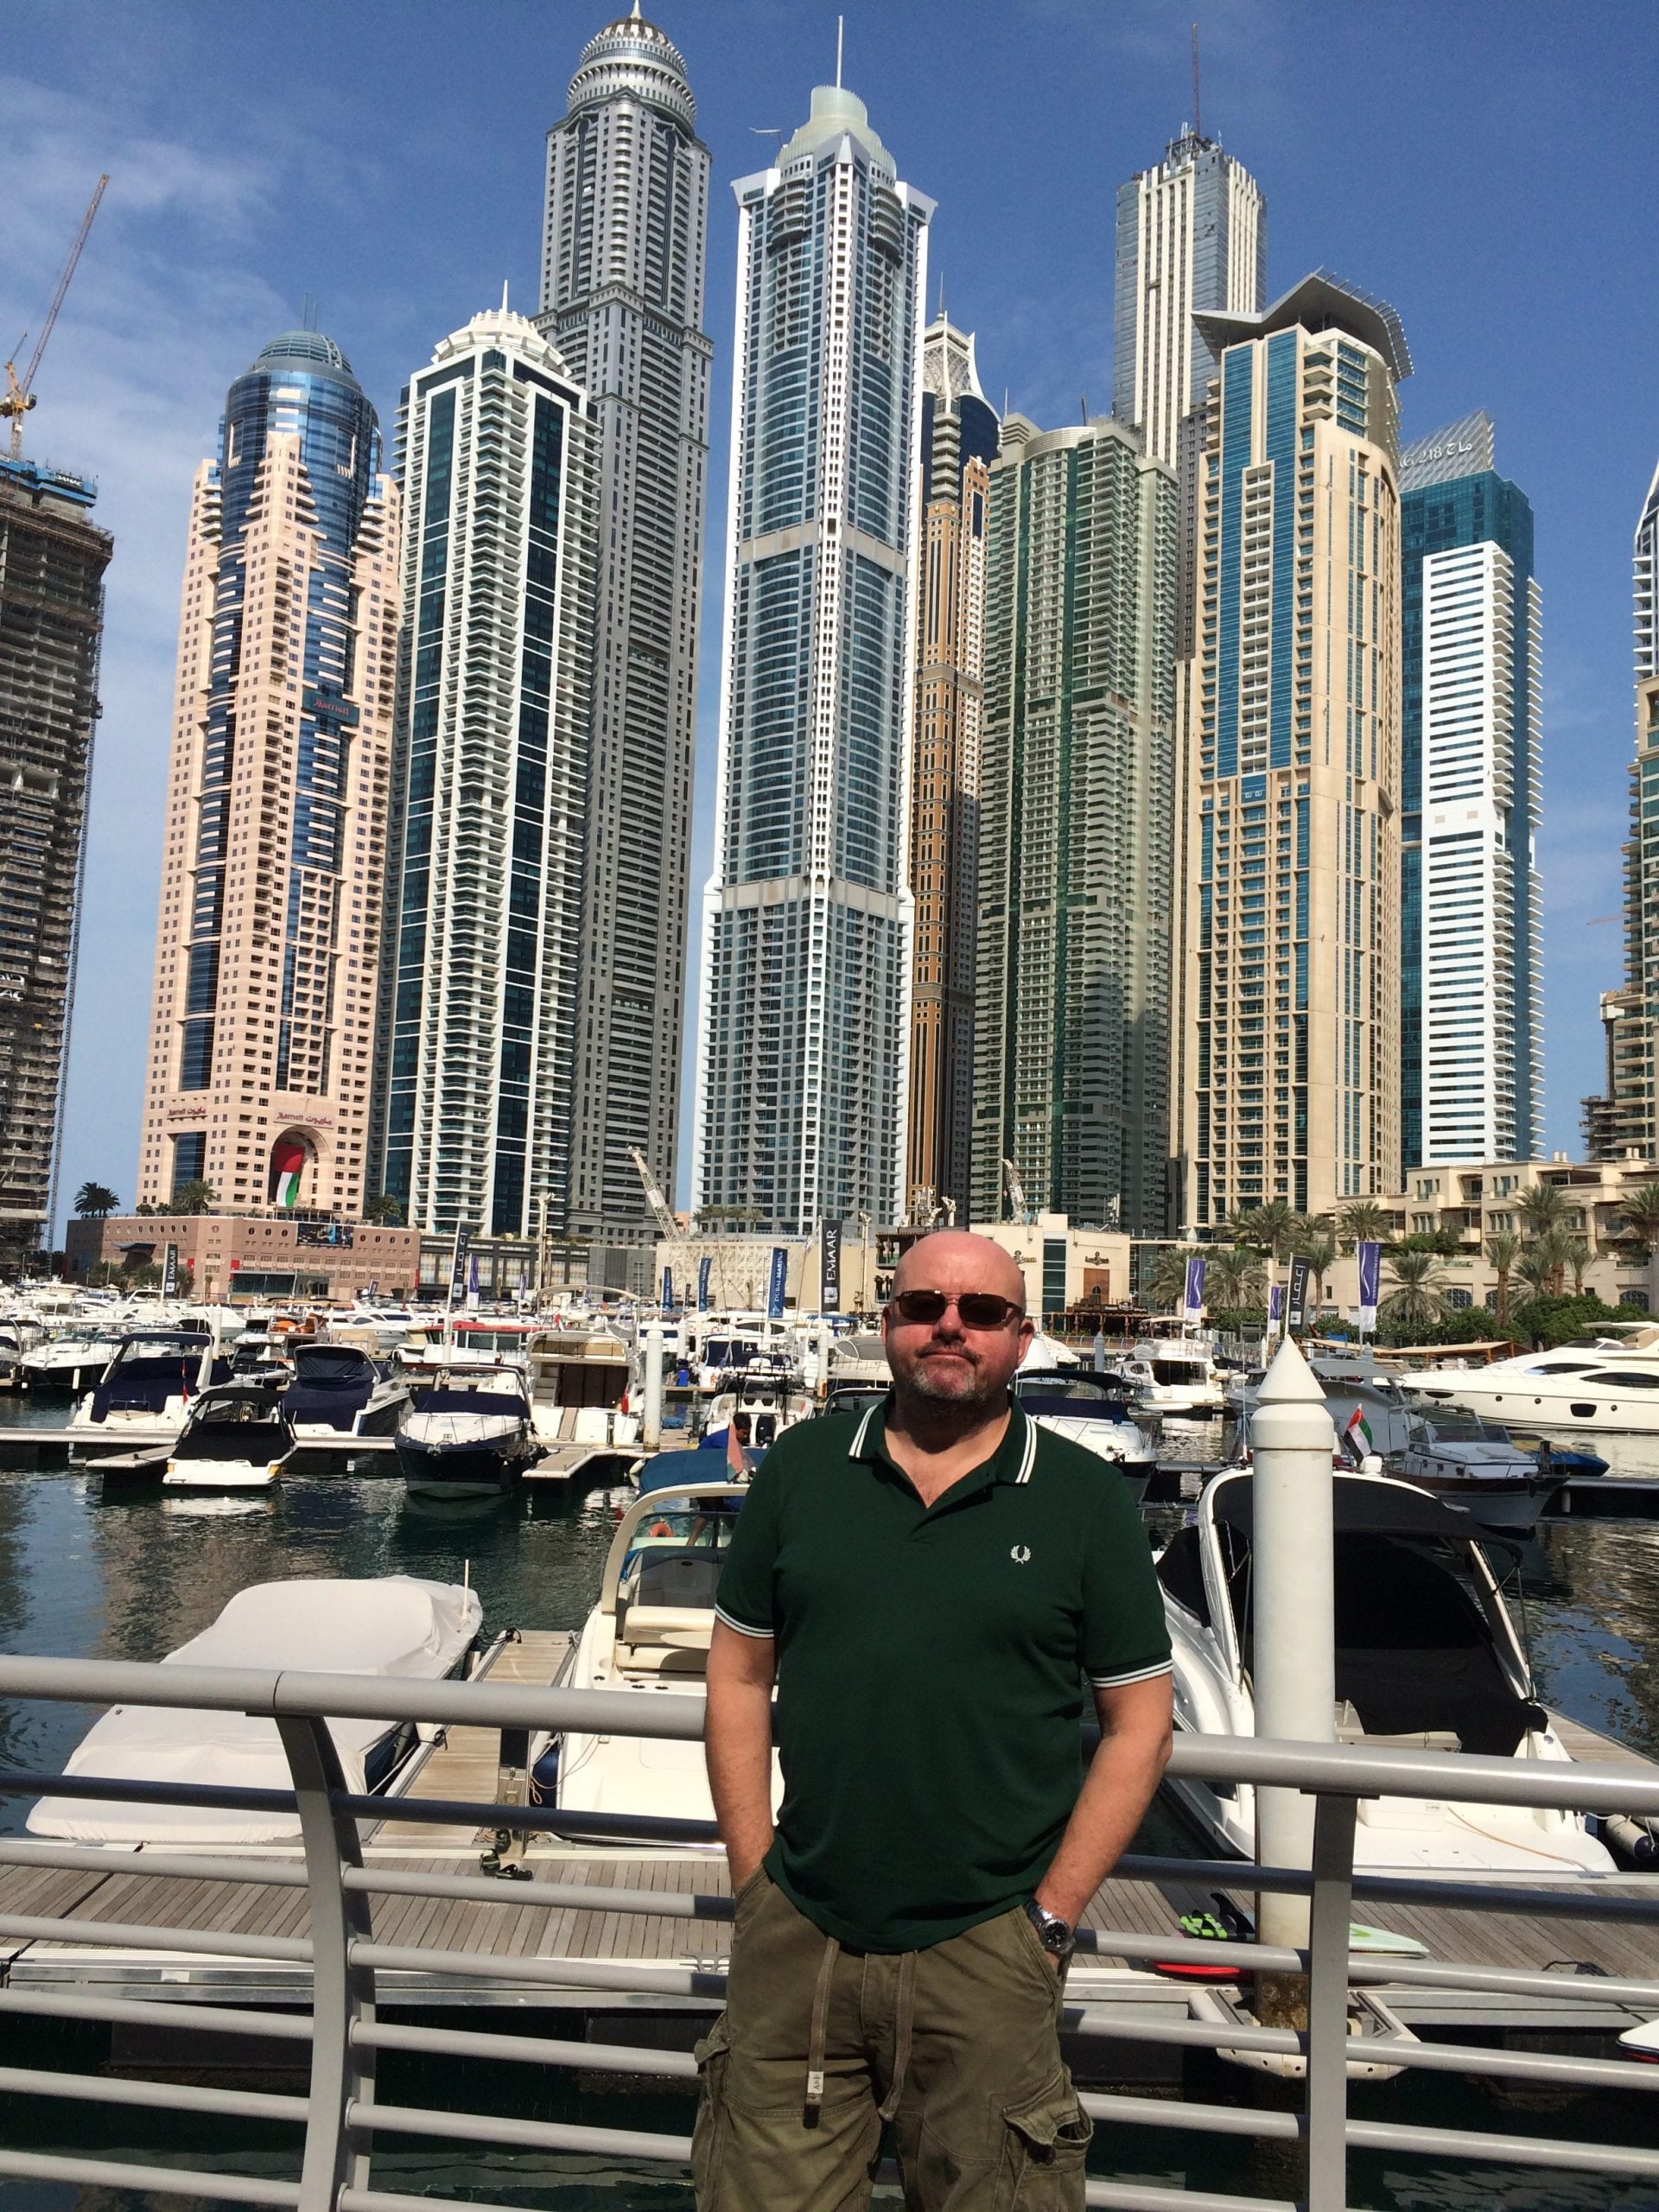 A man in sunglasses and black t-shirt standing in front of huge skyscrapers in Dubai